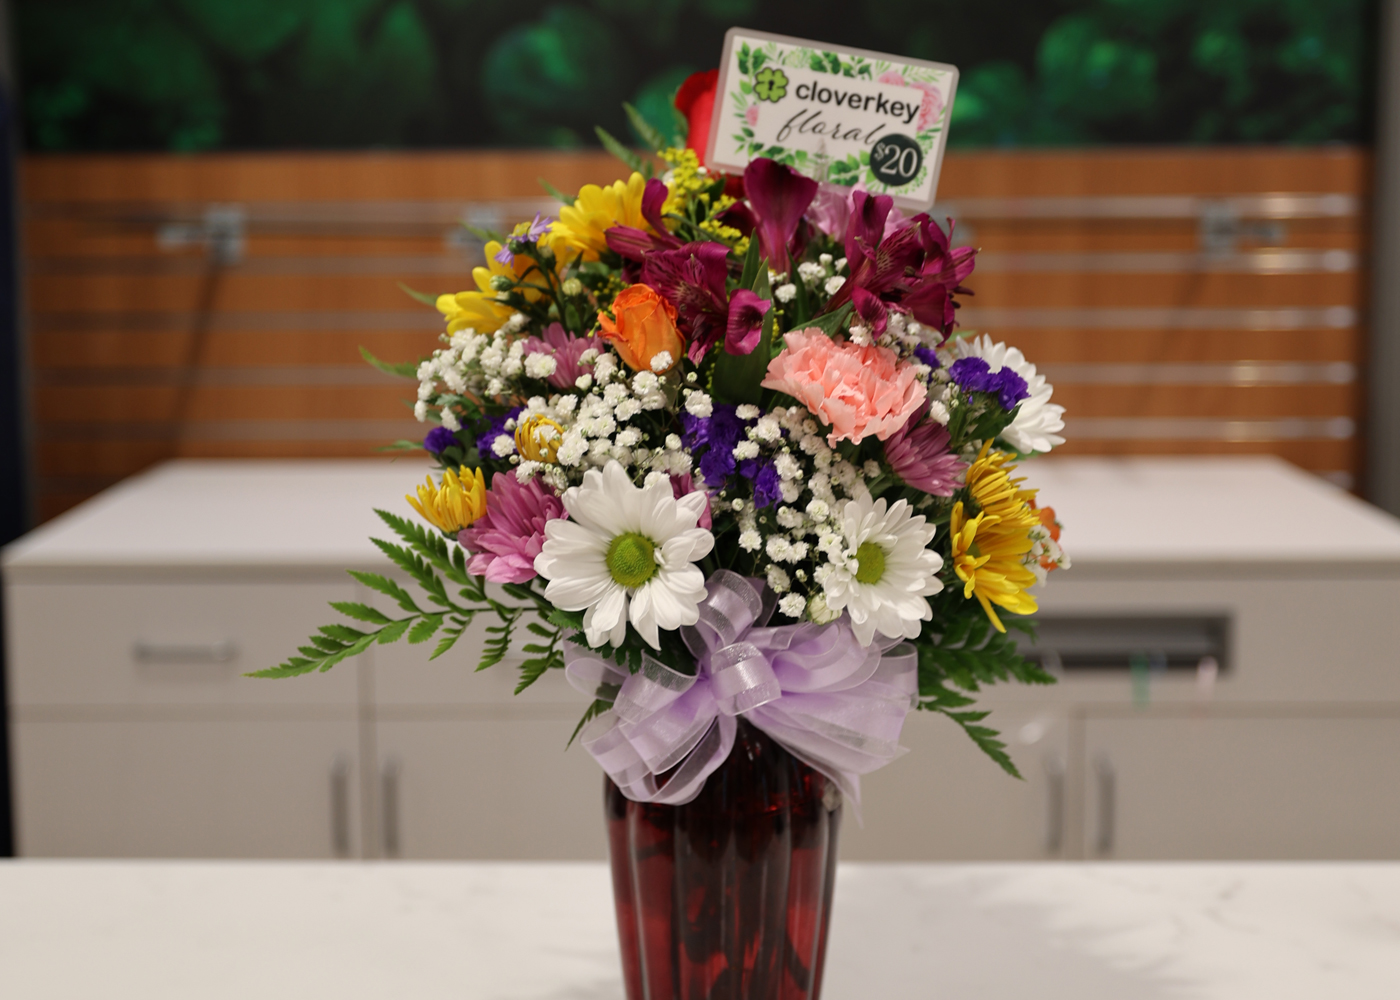 Flowers at the Cloverkey gift shop at The Hospitals of Providence, Memorial Campus